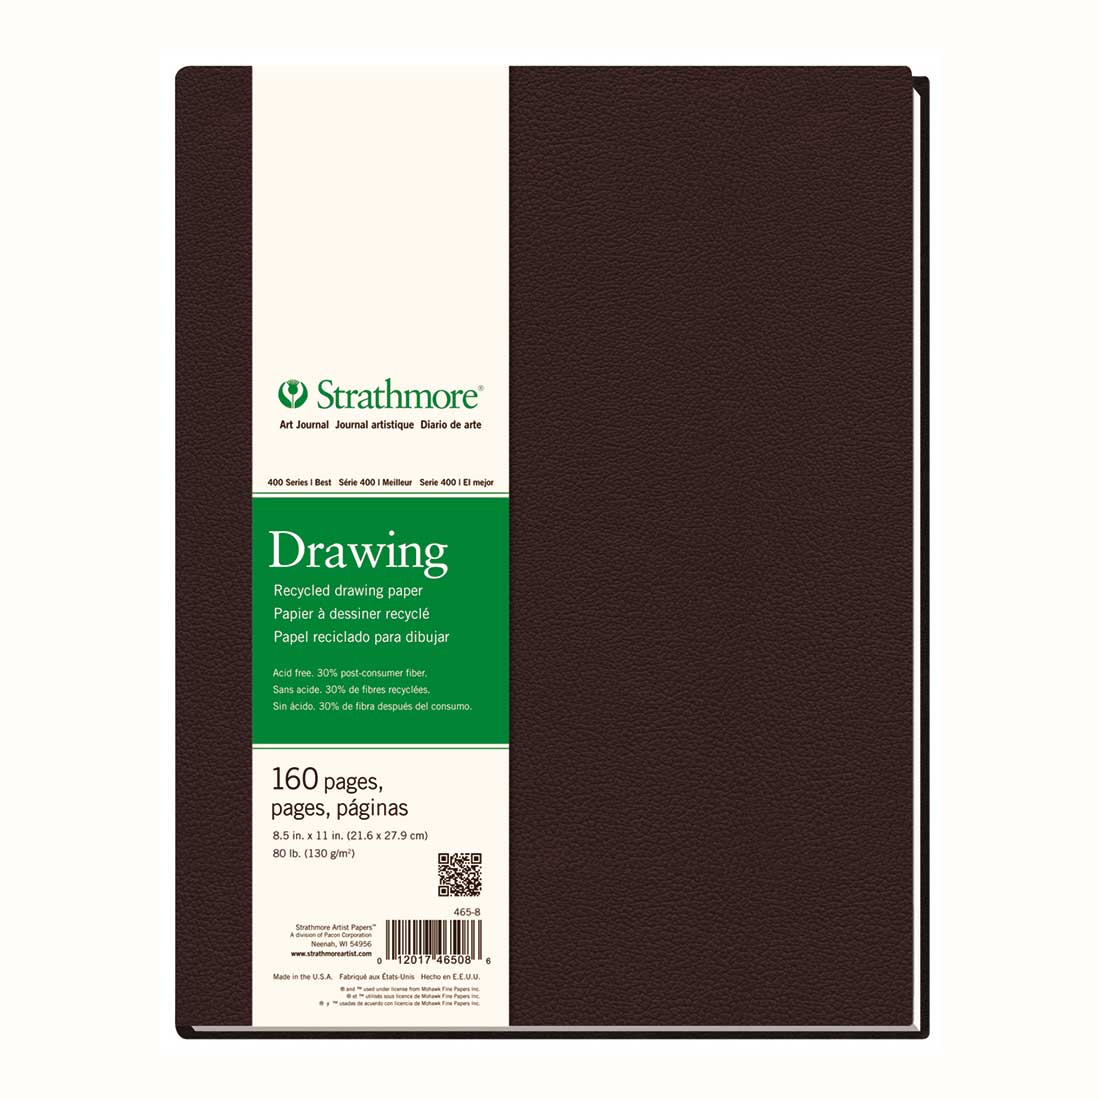 Hahnemuhle Fine Art D & S - sewn drawing book - hard cover - 80